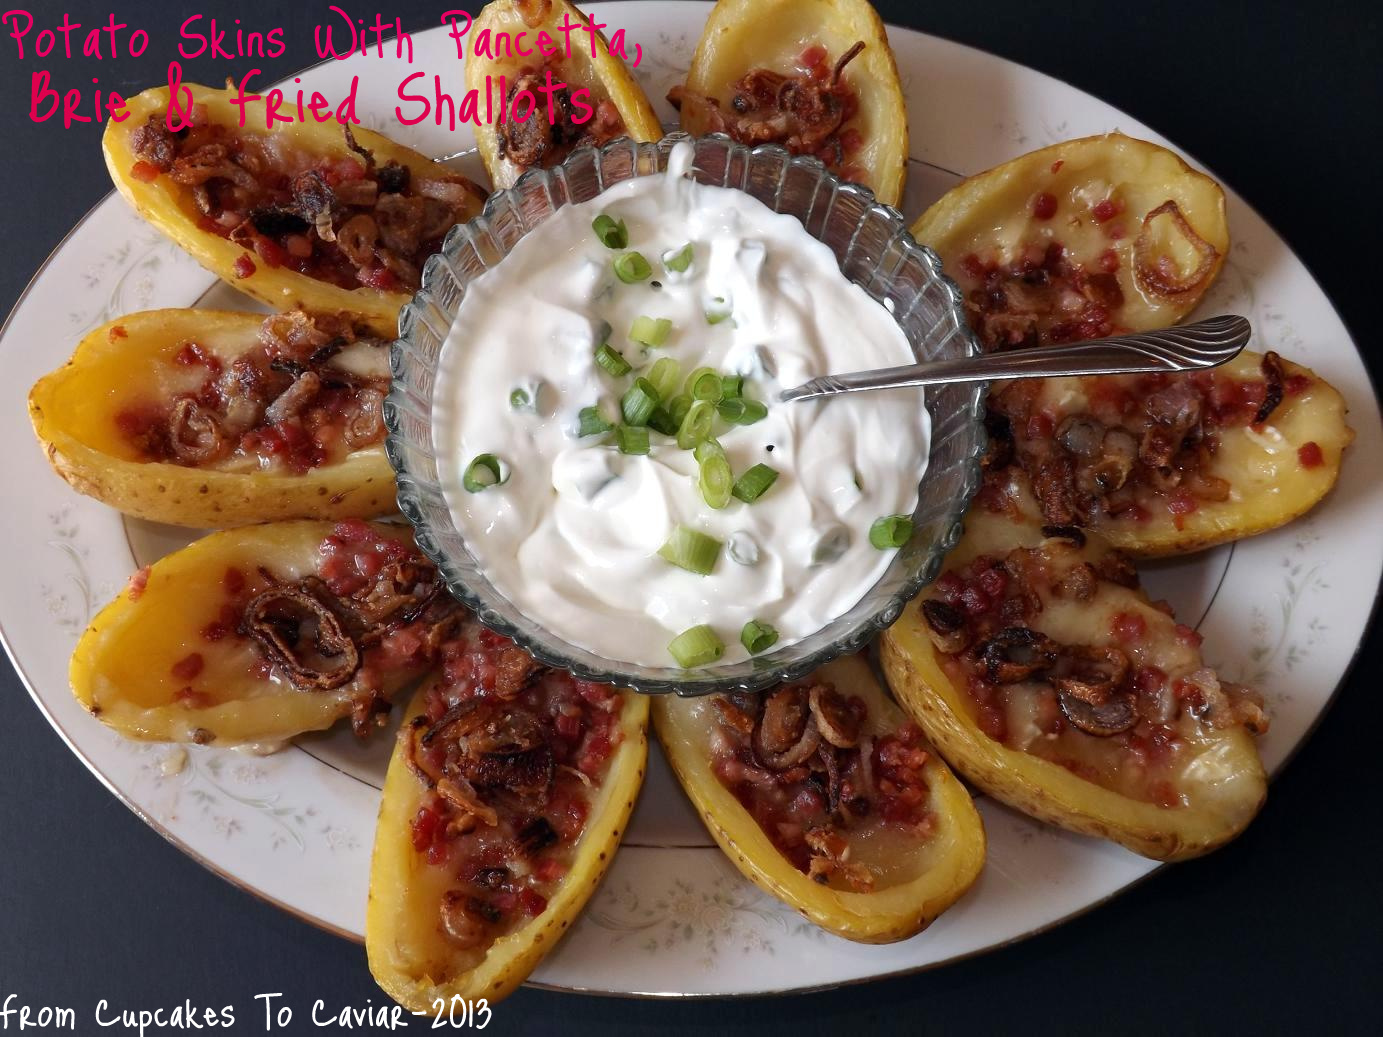 Potato Skins With Pancetta, Brie & Fried Shallots